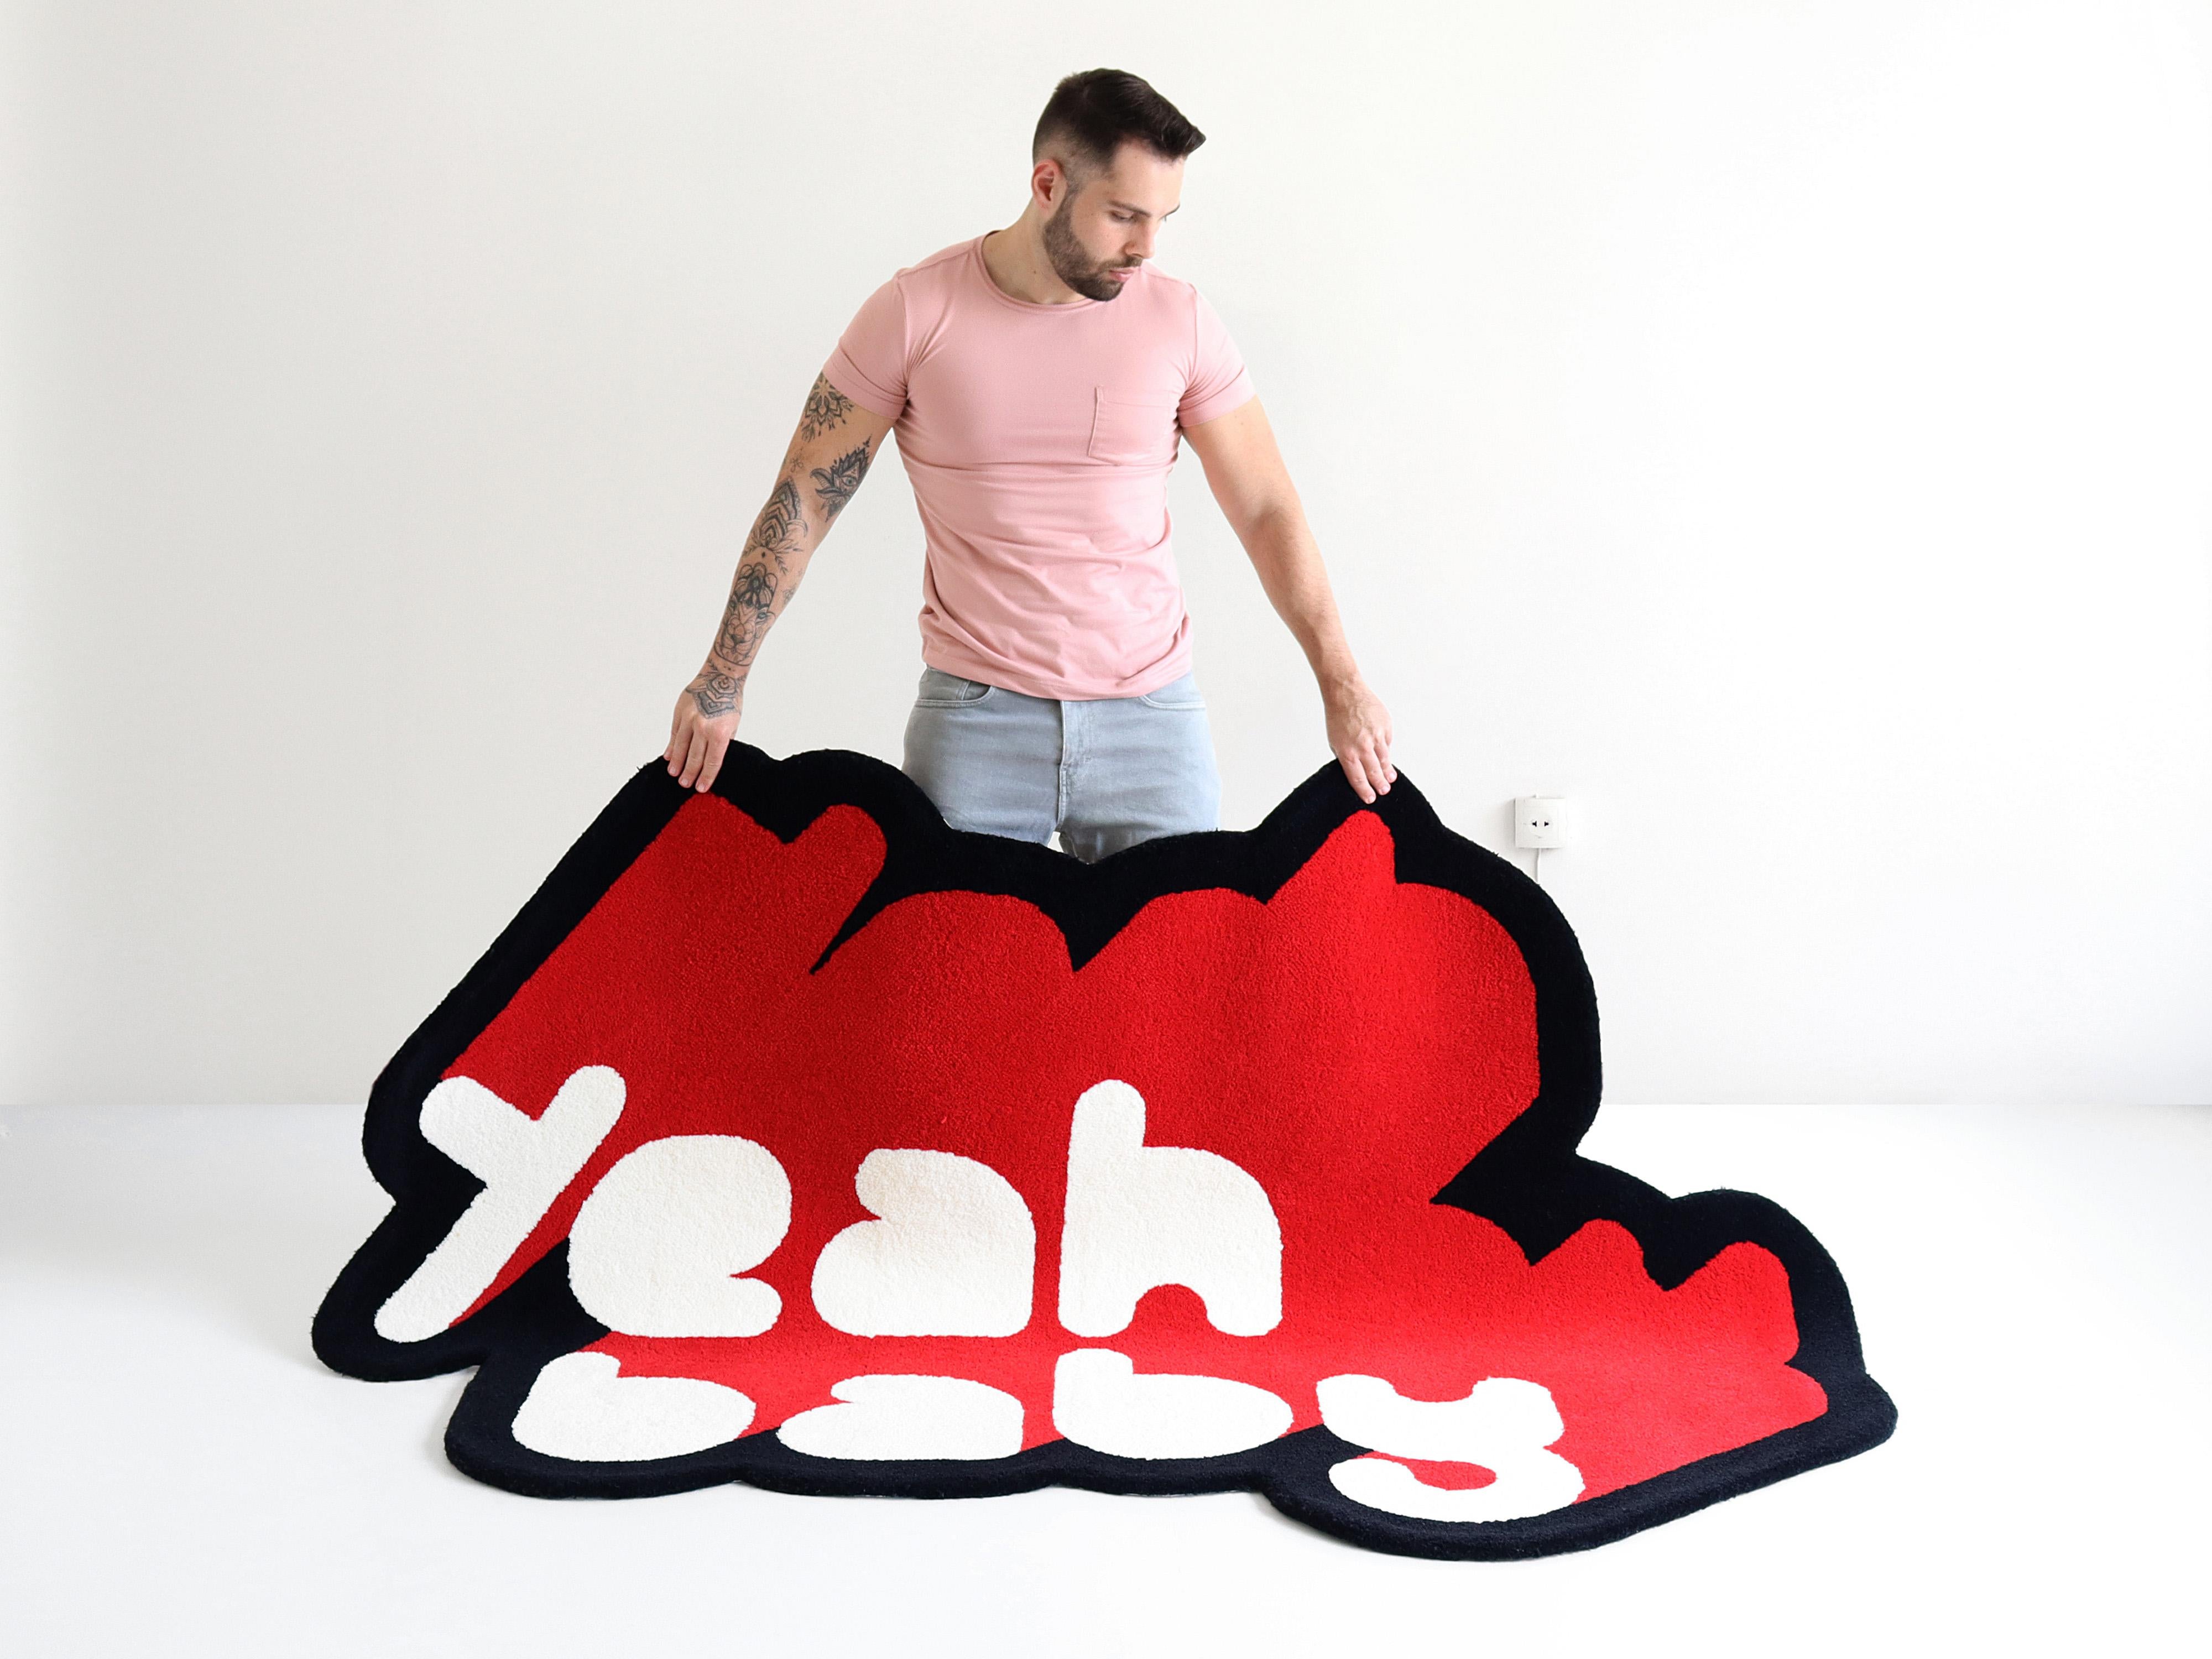 Machine-Made Red, White and Black Yeah Baby Rug from Graffiti Collection by Paulo Kobylka For Sale